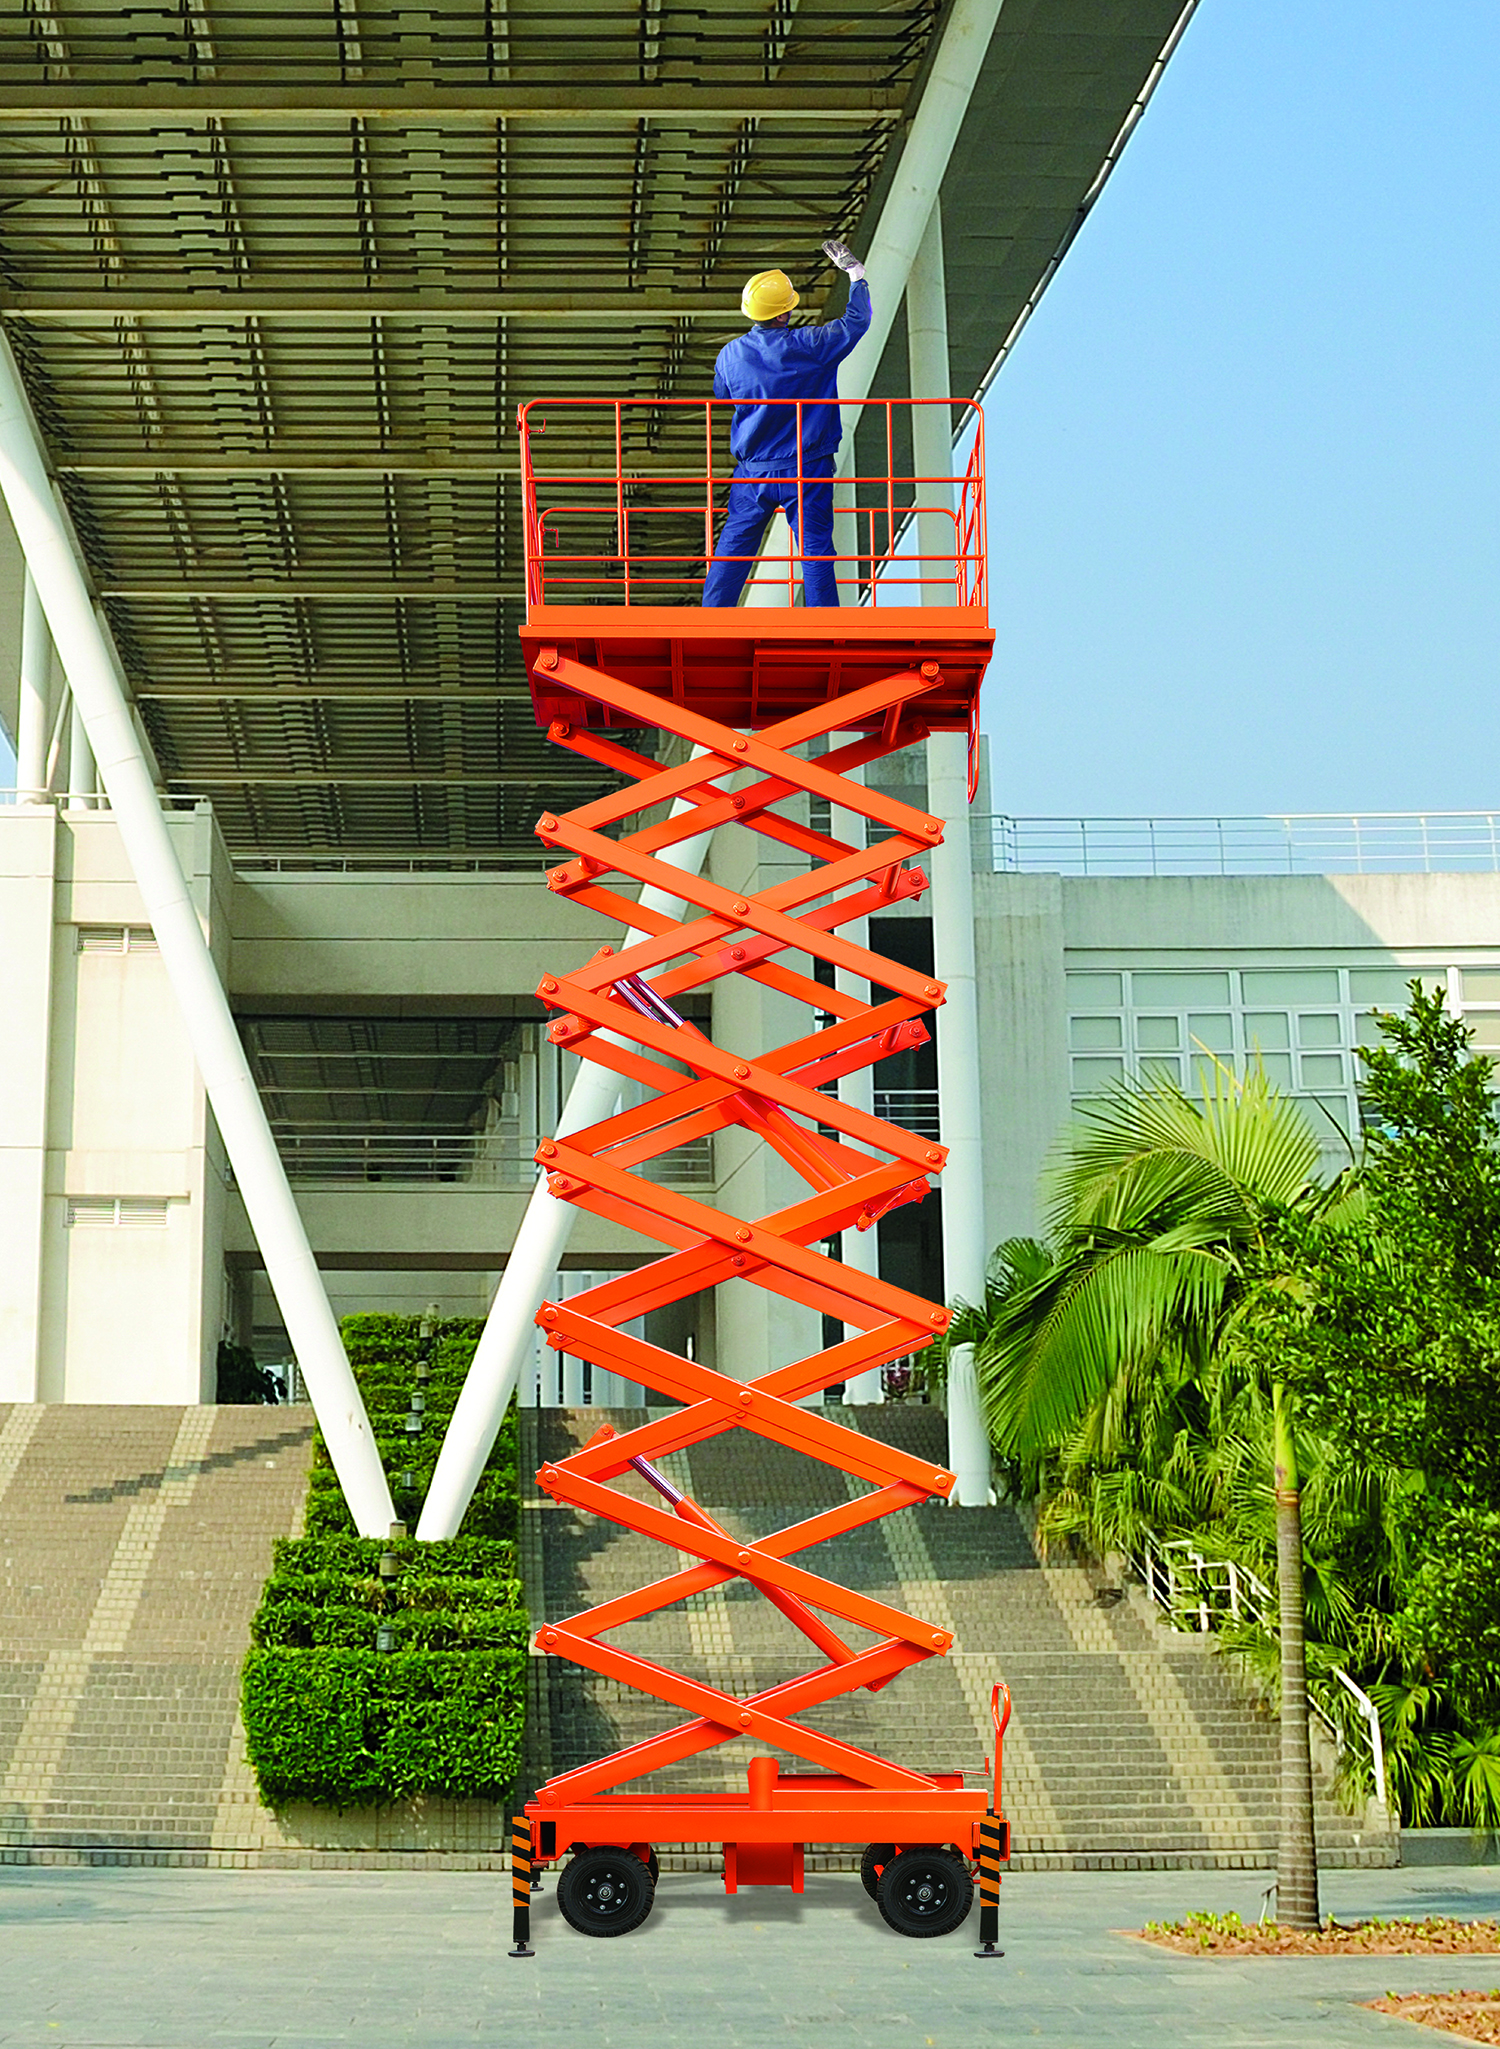 Safety Tips For Using a Scissor/Man Lift